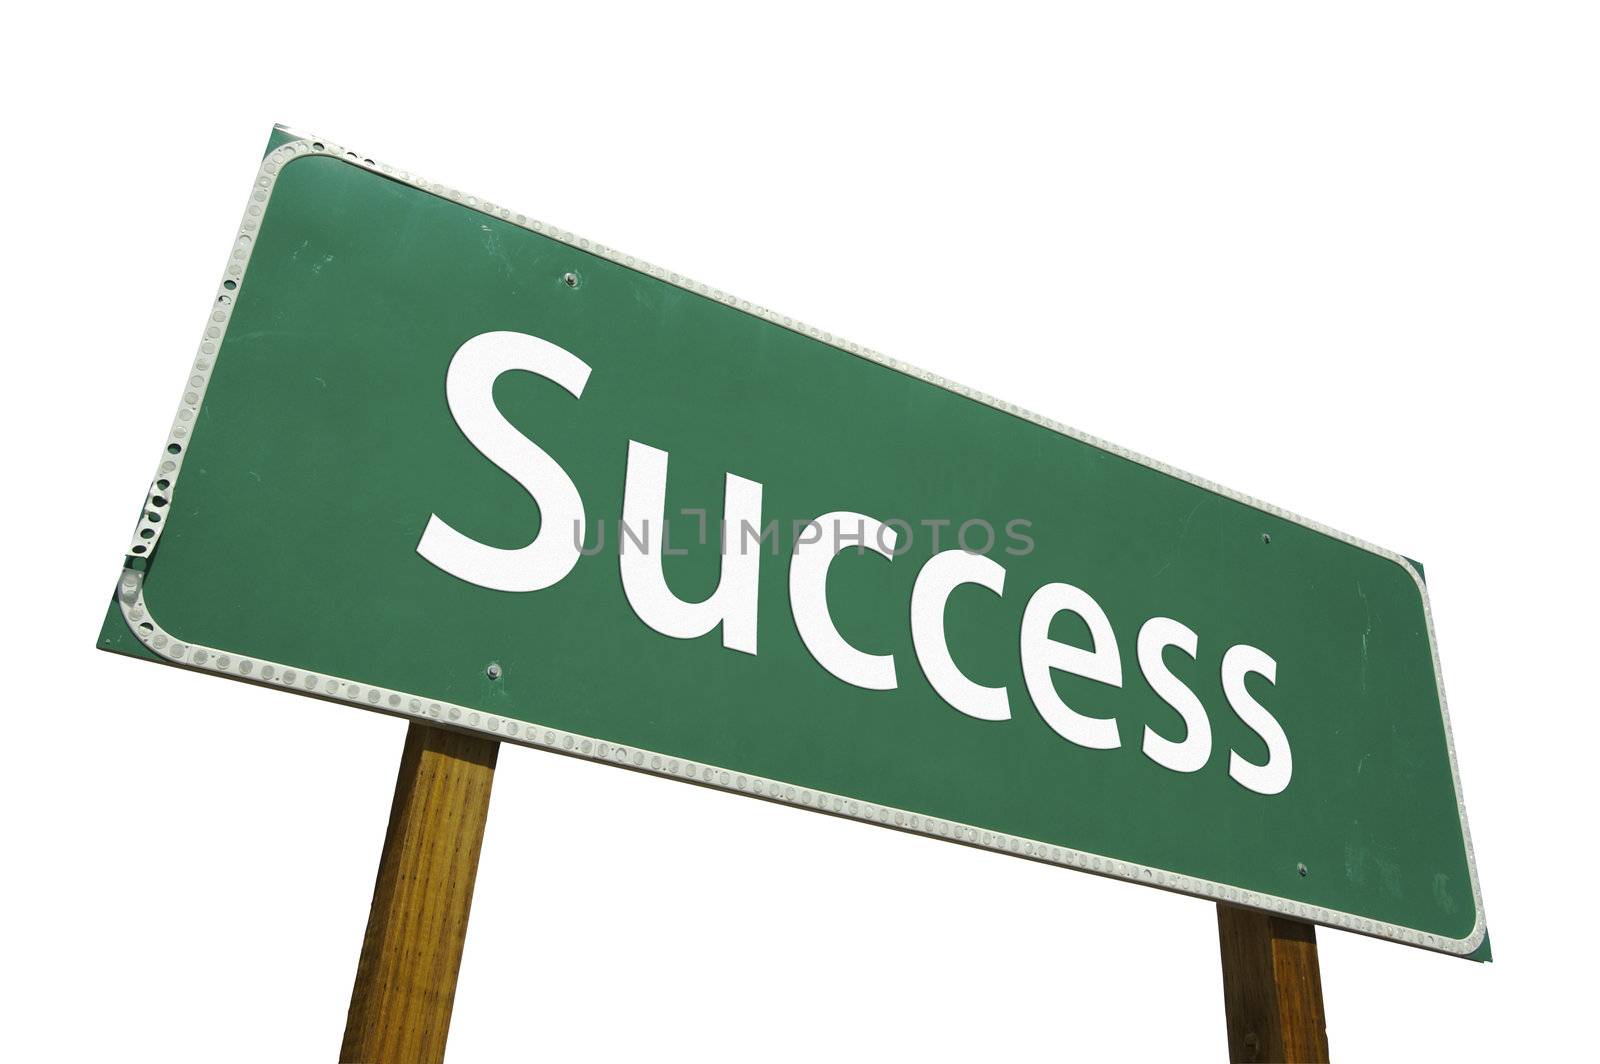 Success Road Sign with Clipping Path by Feverpitched